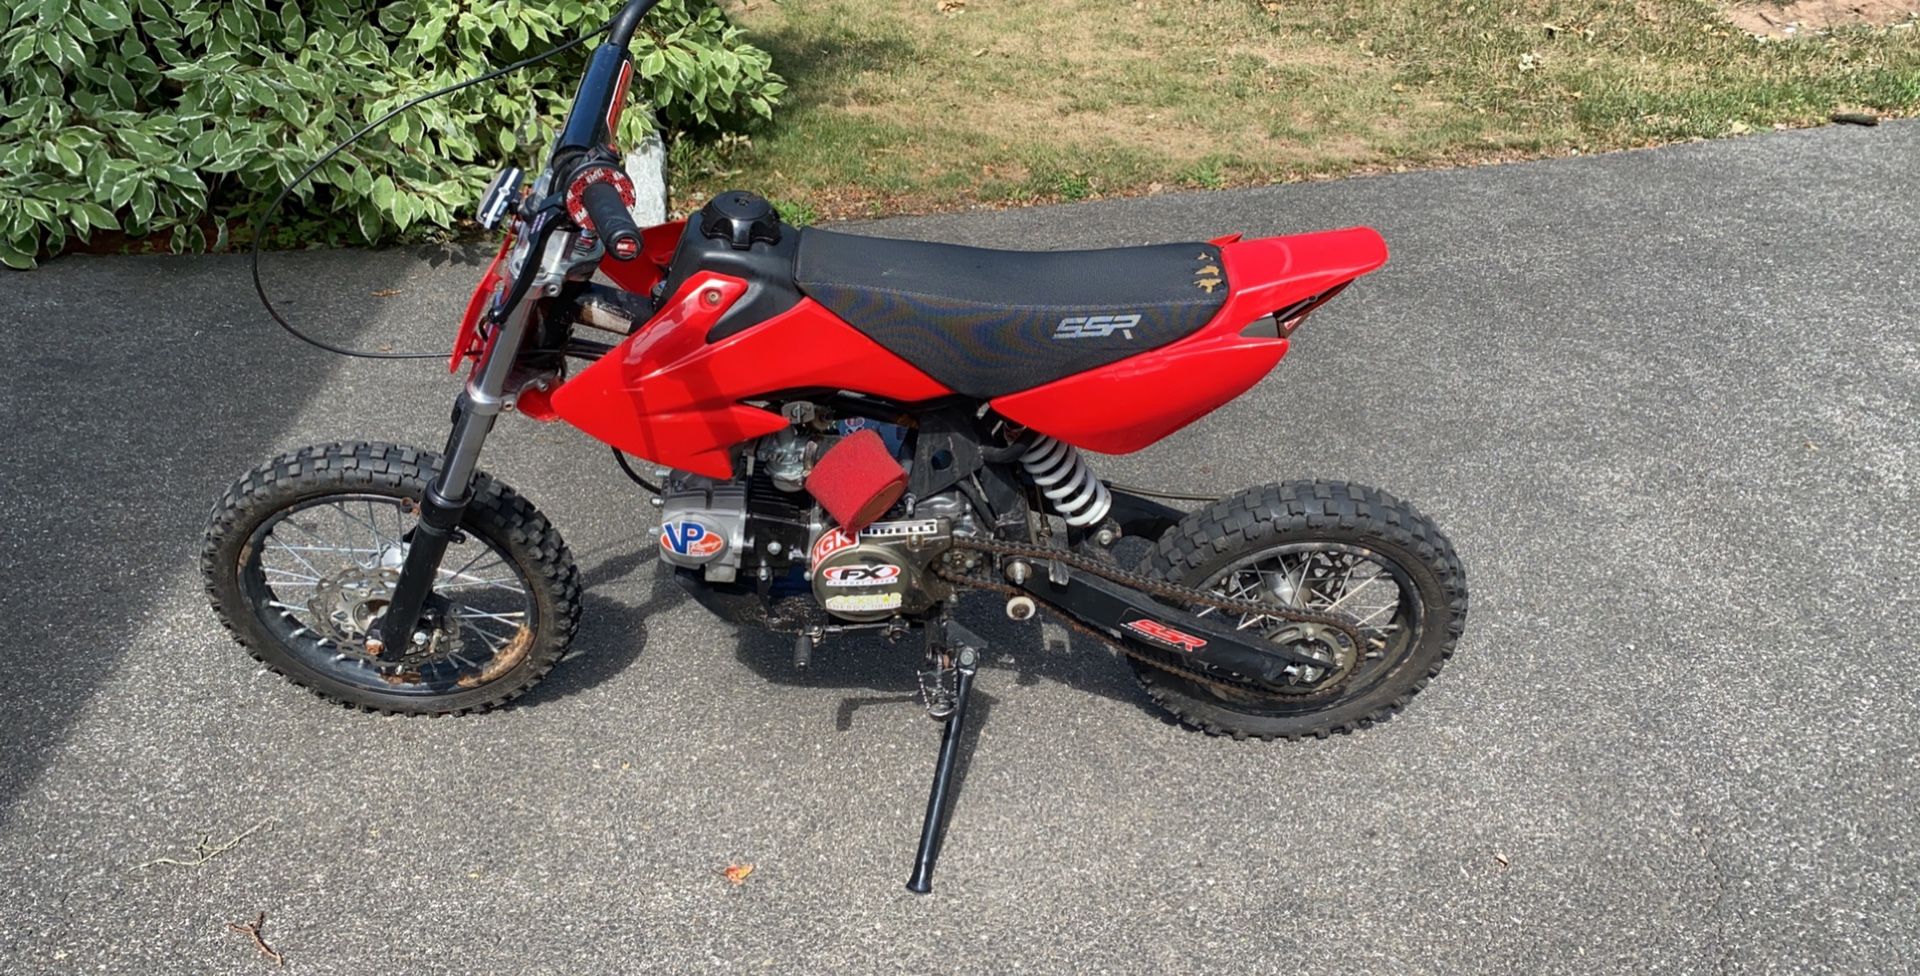 Ssr125 pitbike for sale